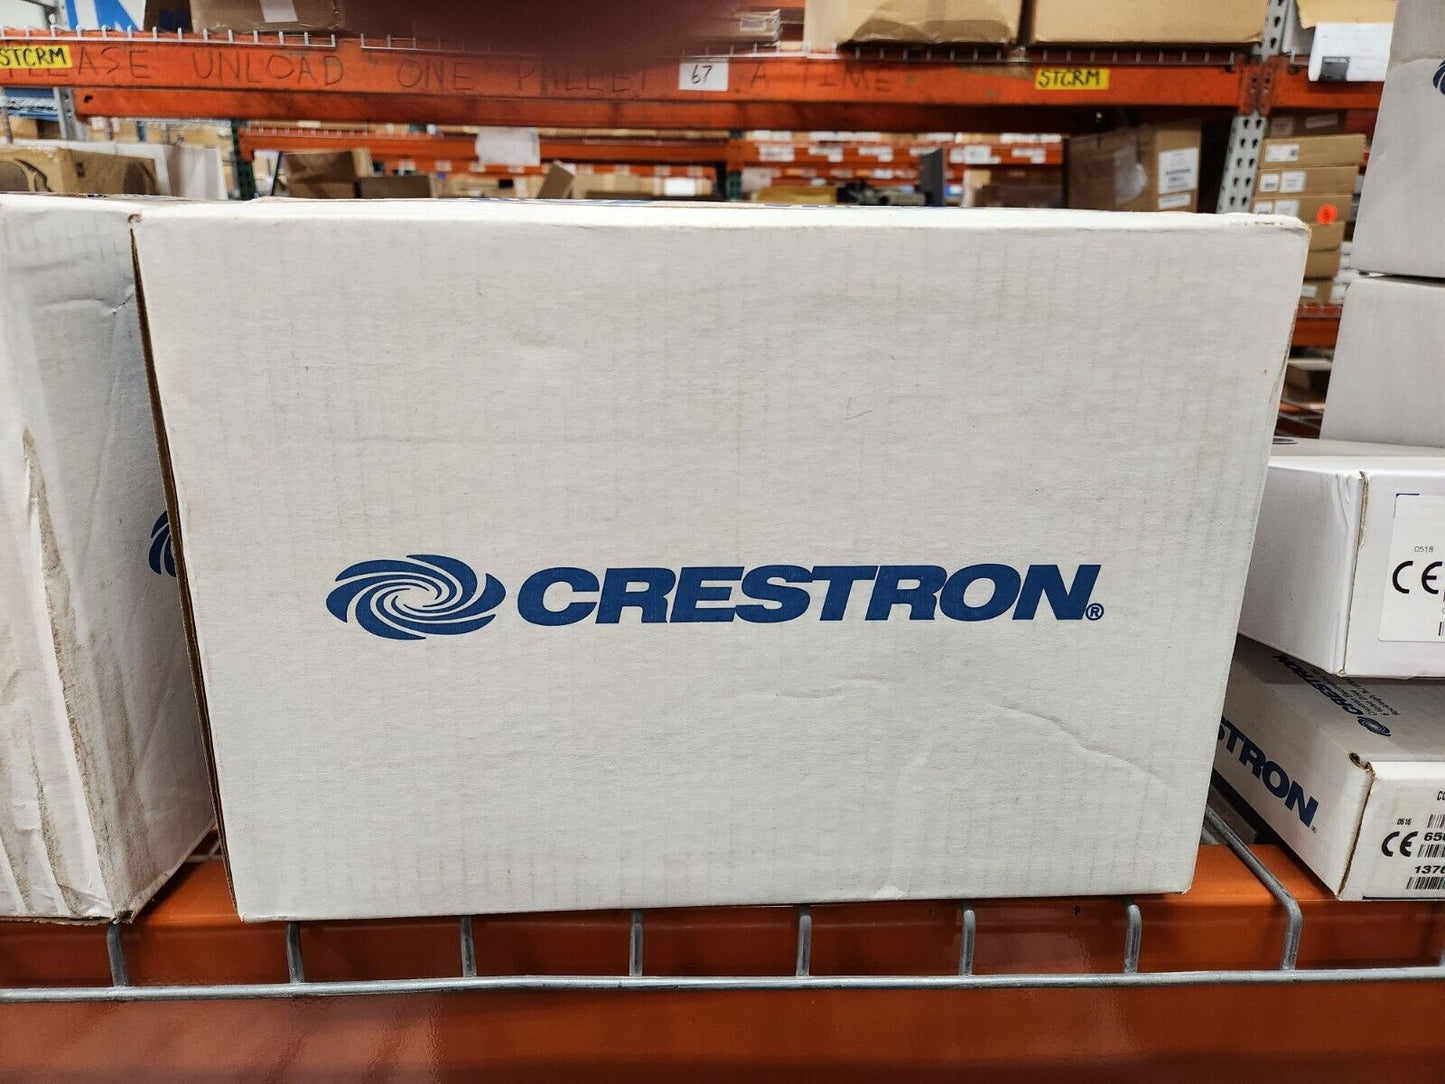 Crestron TSW-1052-B-S 10.1” Touch Screen - Black Smooth 6506899 NEW